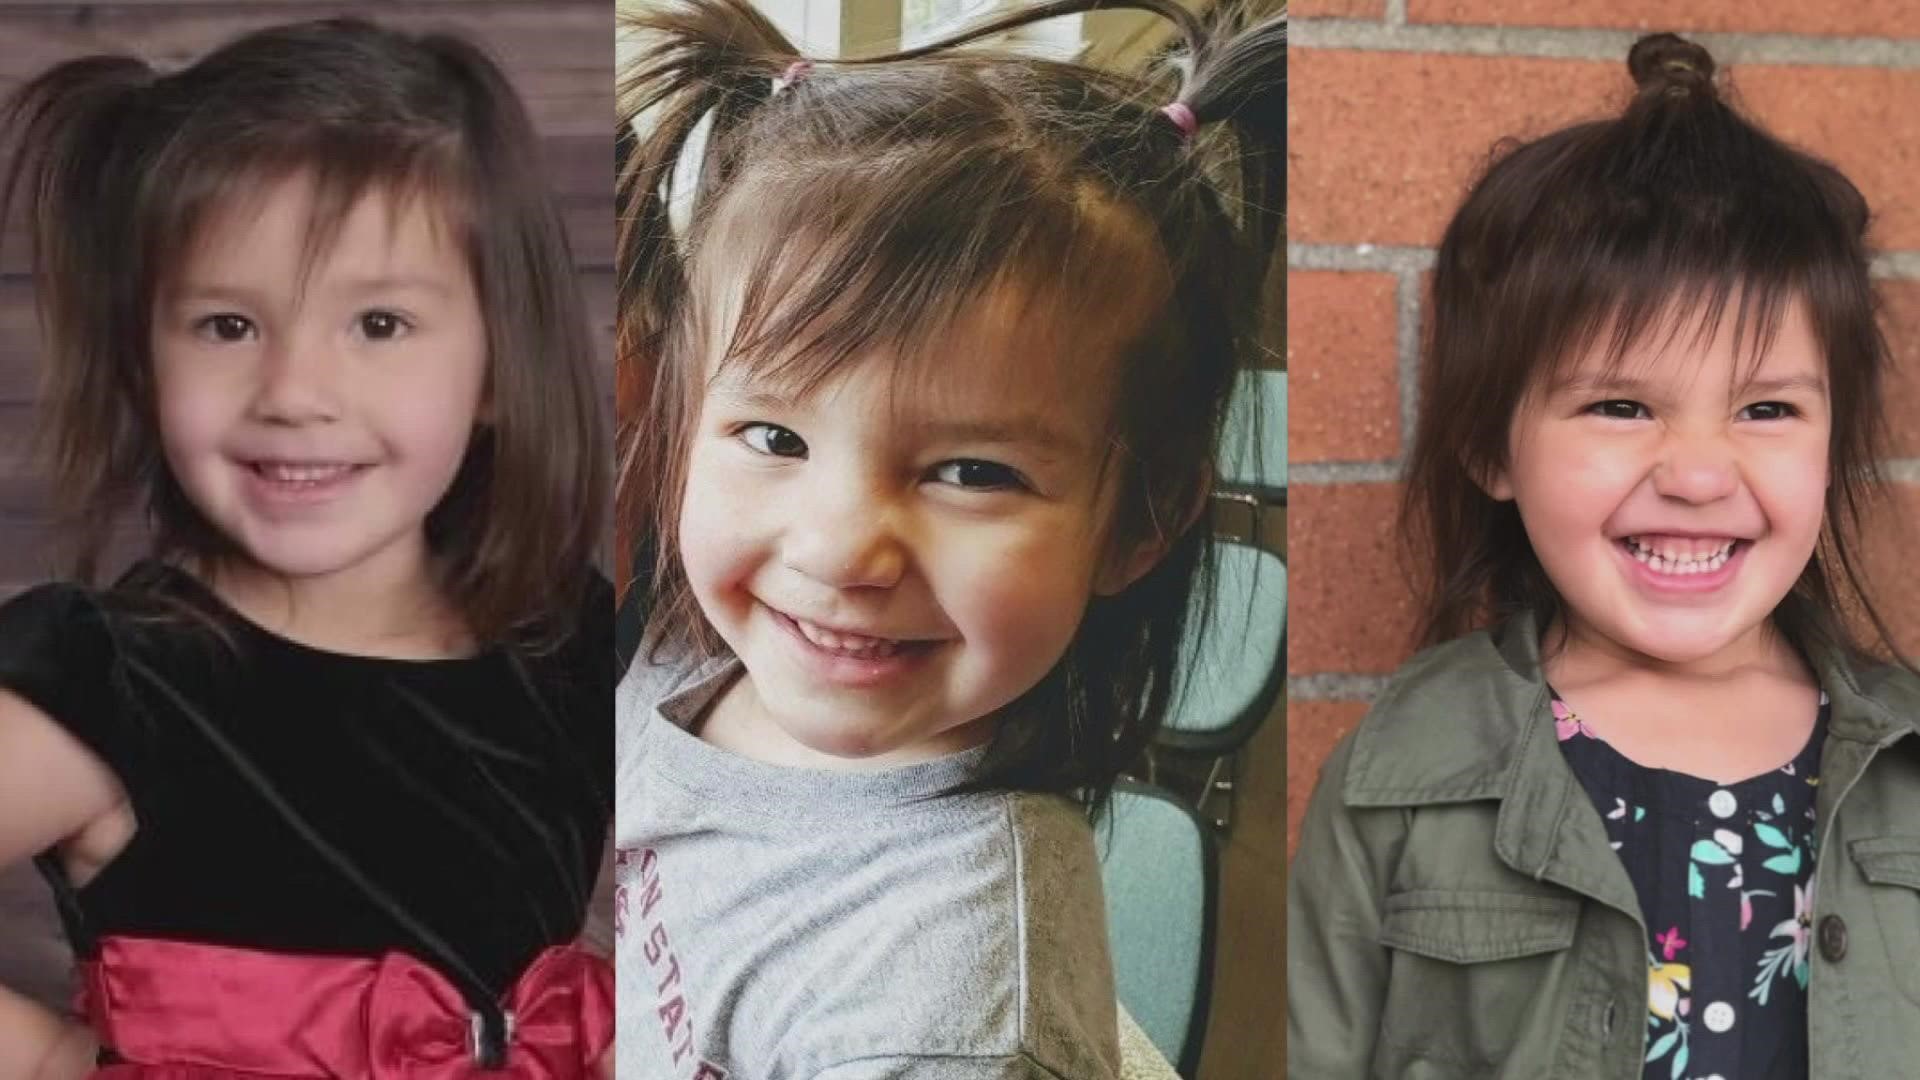 The Grays Harbor County Sheriff's Office is asking anyone who saw 5-year-old Oakley Carlson over the past year to come forward.